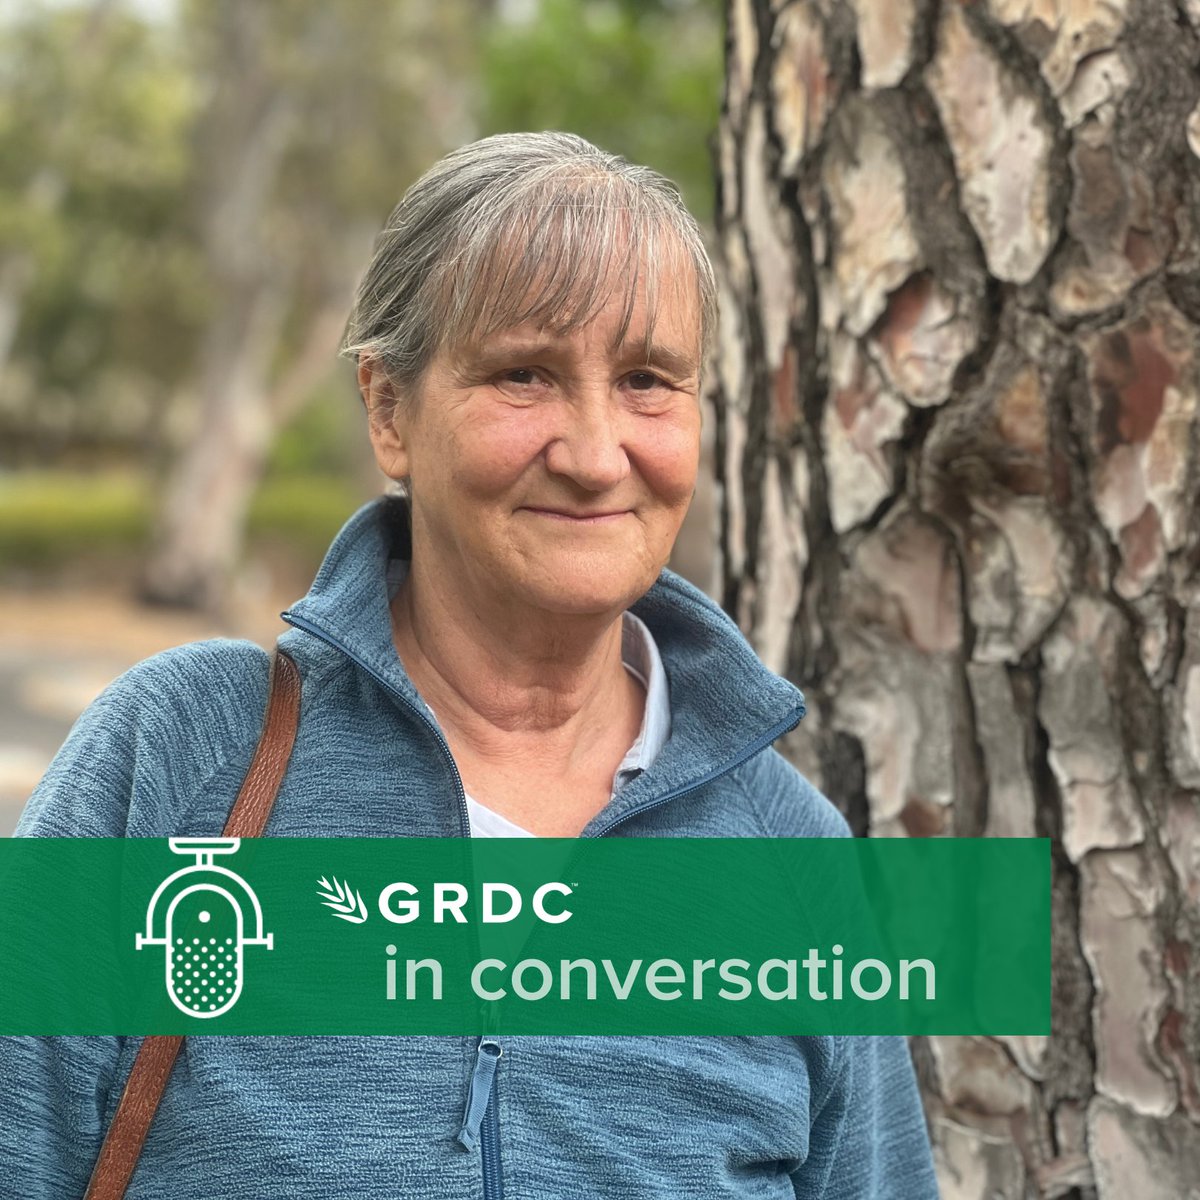 🎙️ NEW PODCAST 'GRDC in Conversation' with Dr Ann McNeill, a soil scientist who started life in the UK, spent time in Syria working in dryland agriculture & landed in Oz where she’s worked with farmers to help improve their crops. With @Olilelievre ▶️ bit.ly/3pd79Cp